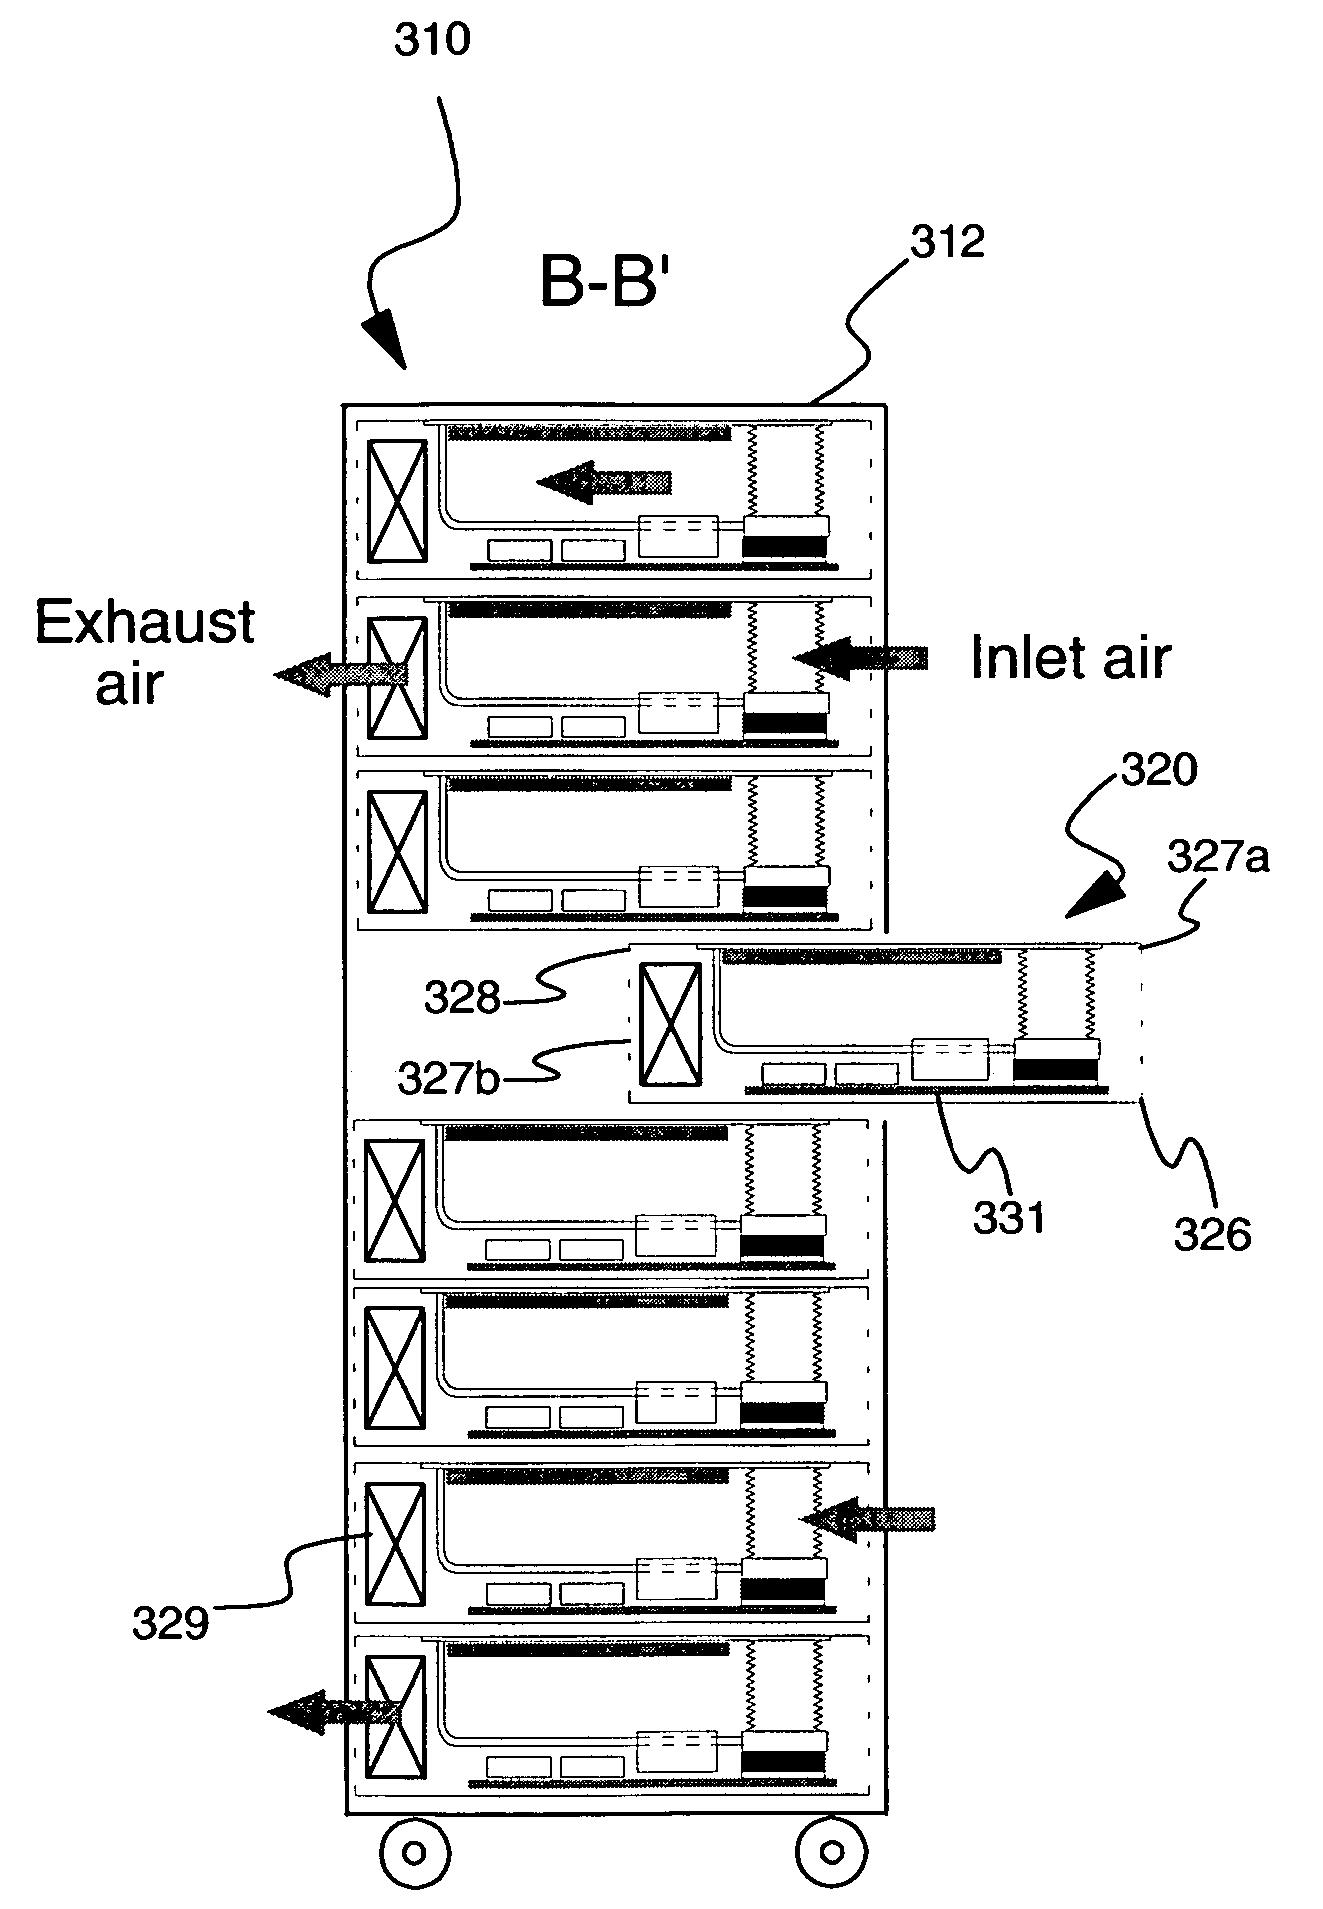 Cooling assembly for electronics drawer using passive fluid loop and air-cooled cover